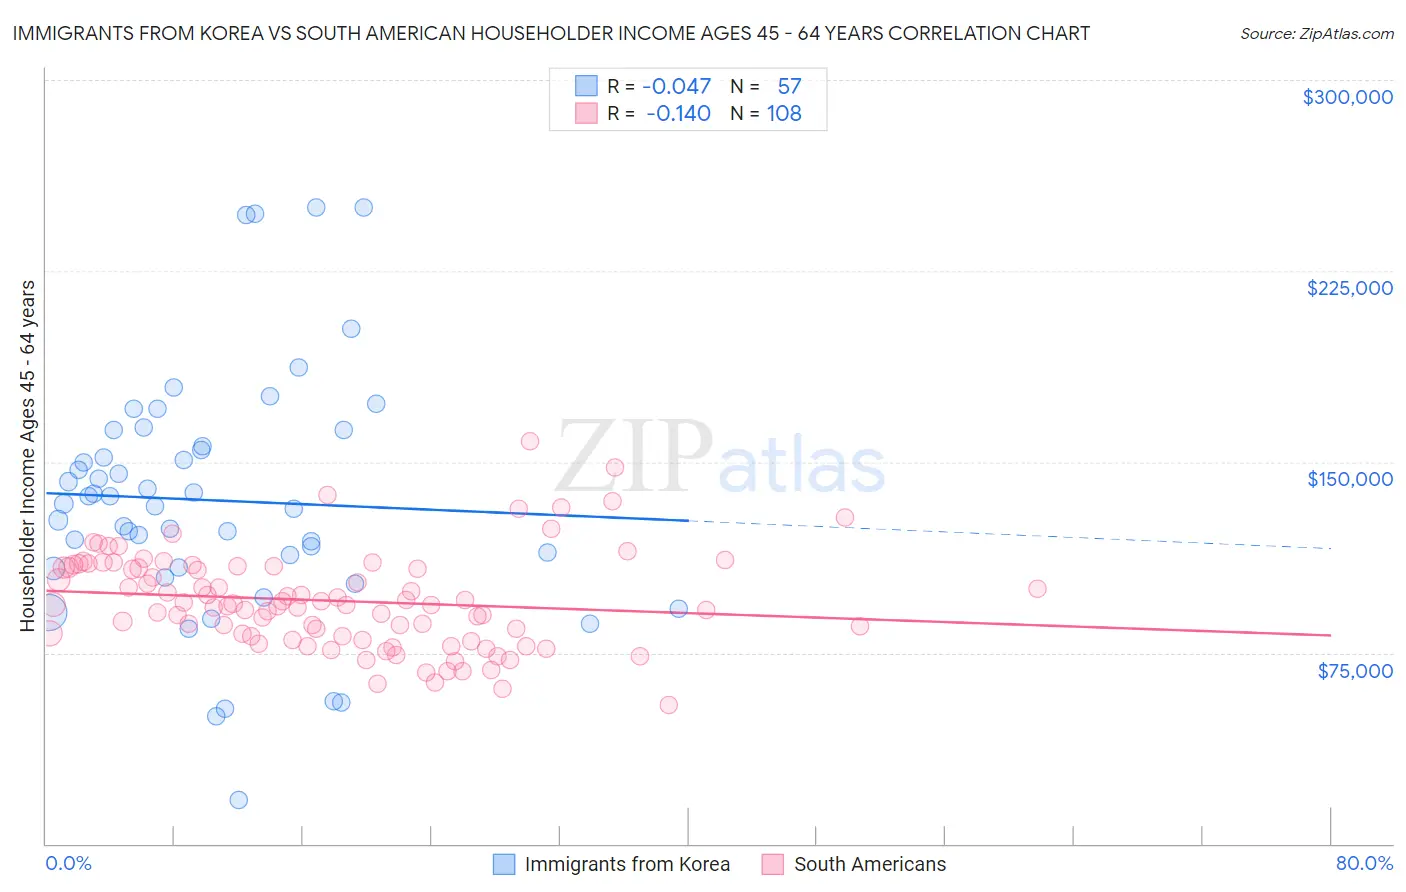 Immigrants from Korea vs South American Householder Income Ages 45 - 64 years